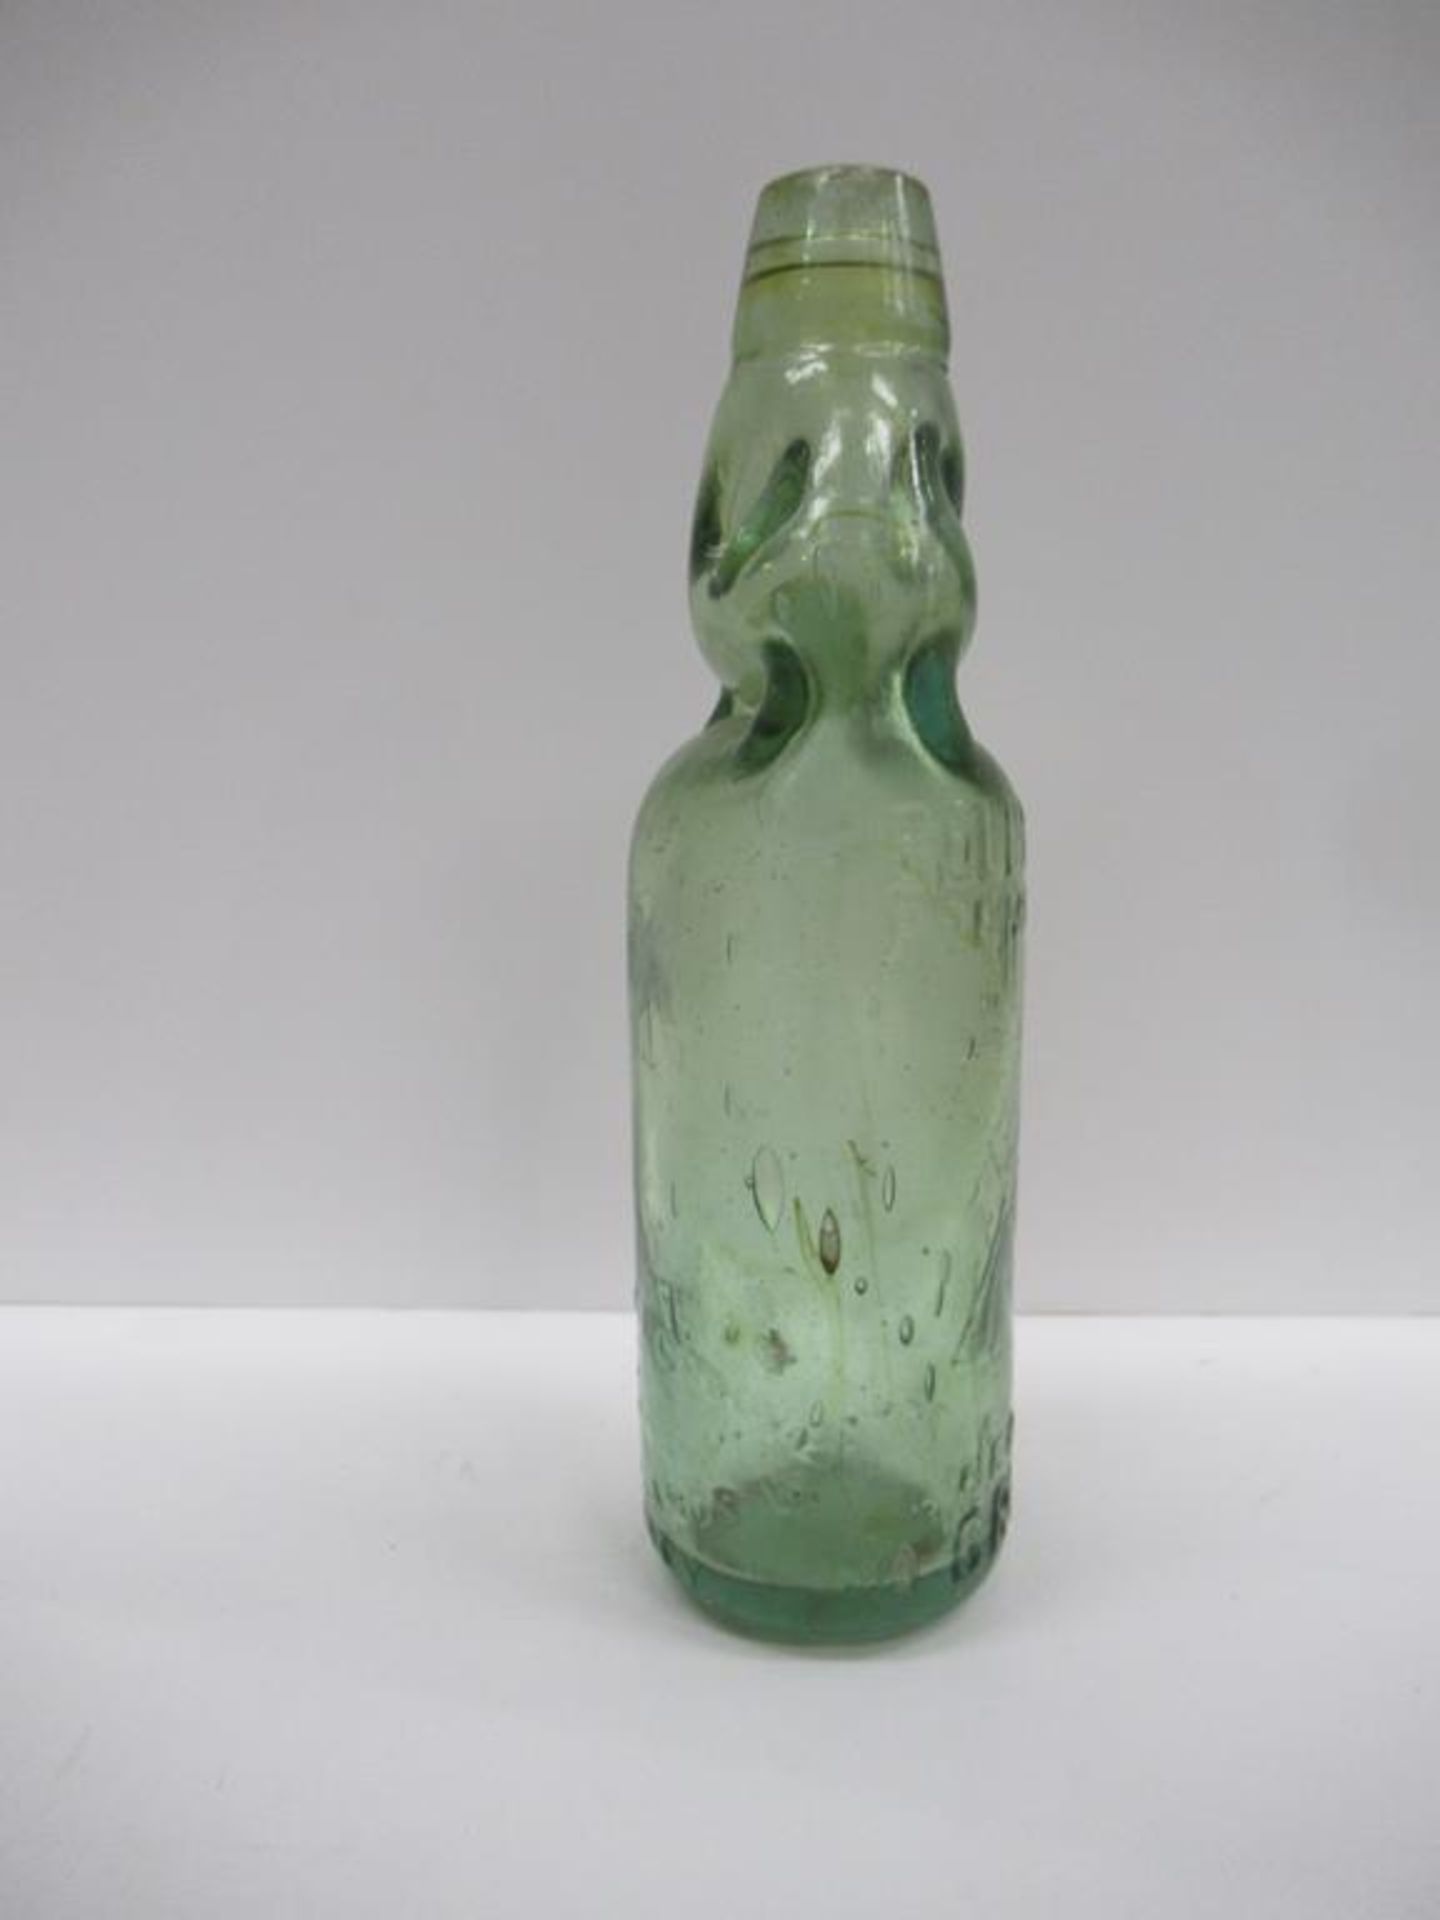 Grimsby New Clee Bellamy Bros Premier works coloured codd bottle - Image 2 of 6